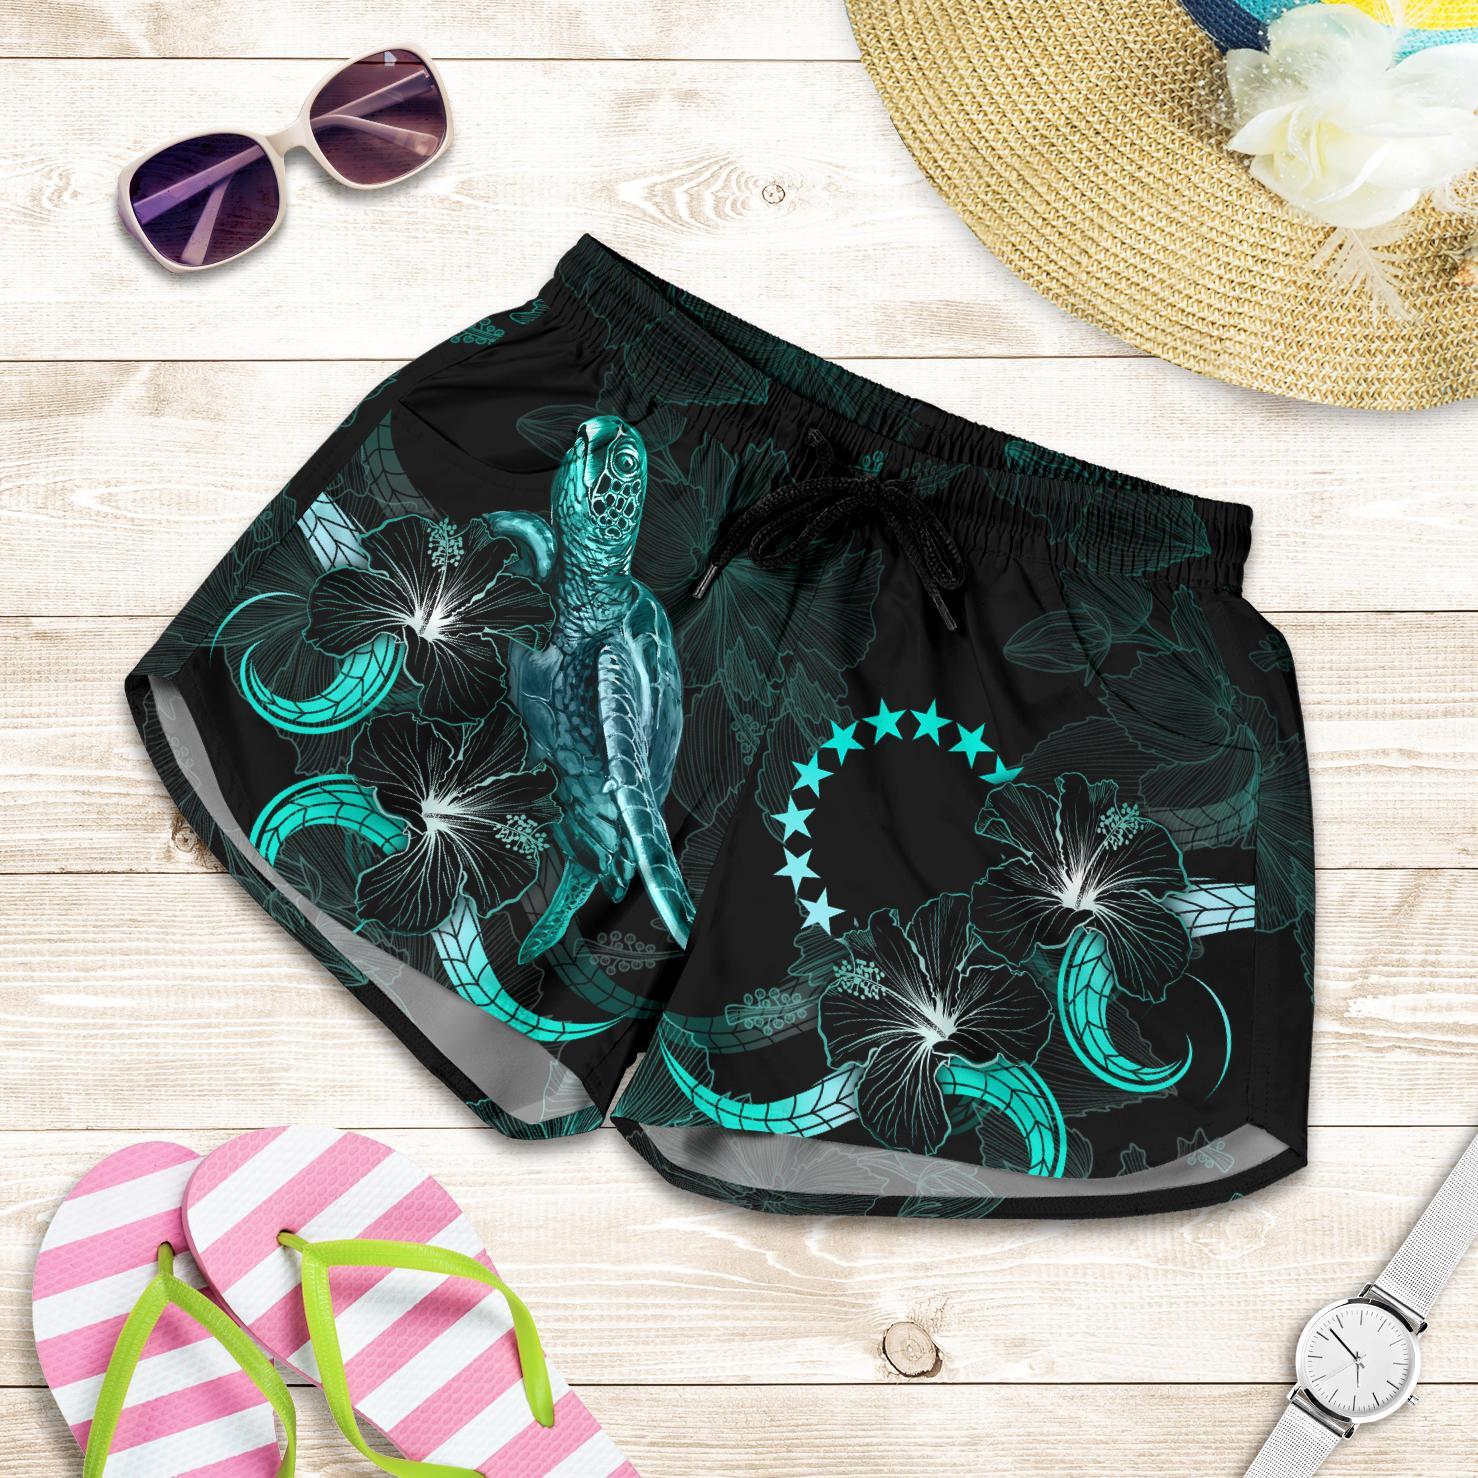 Cook Islands Polynesian Women's Shorts - Turtle With Blooming Hibiscus Turquoise Women Art - Polynesian Pride